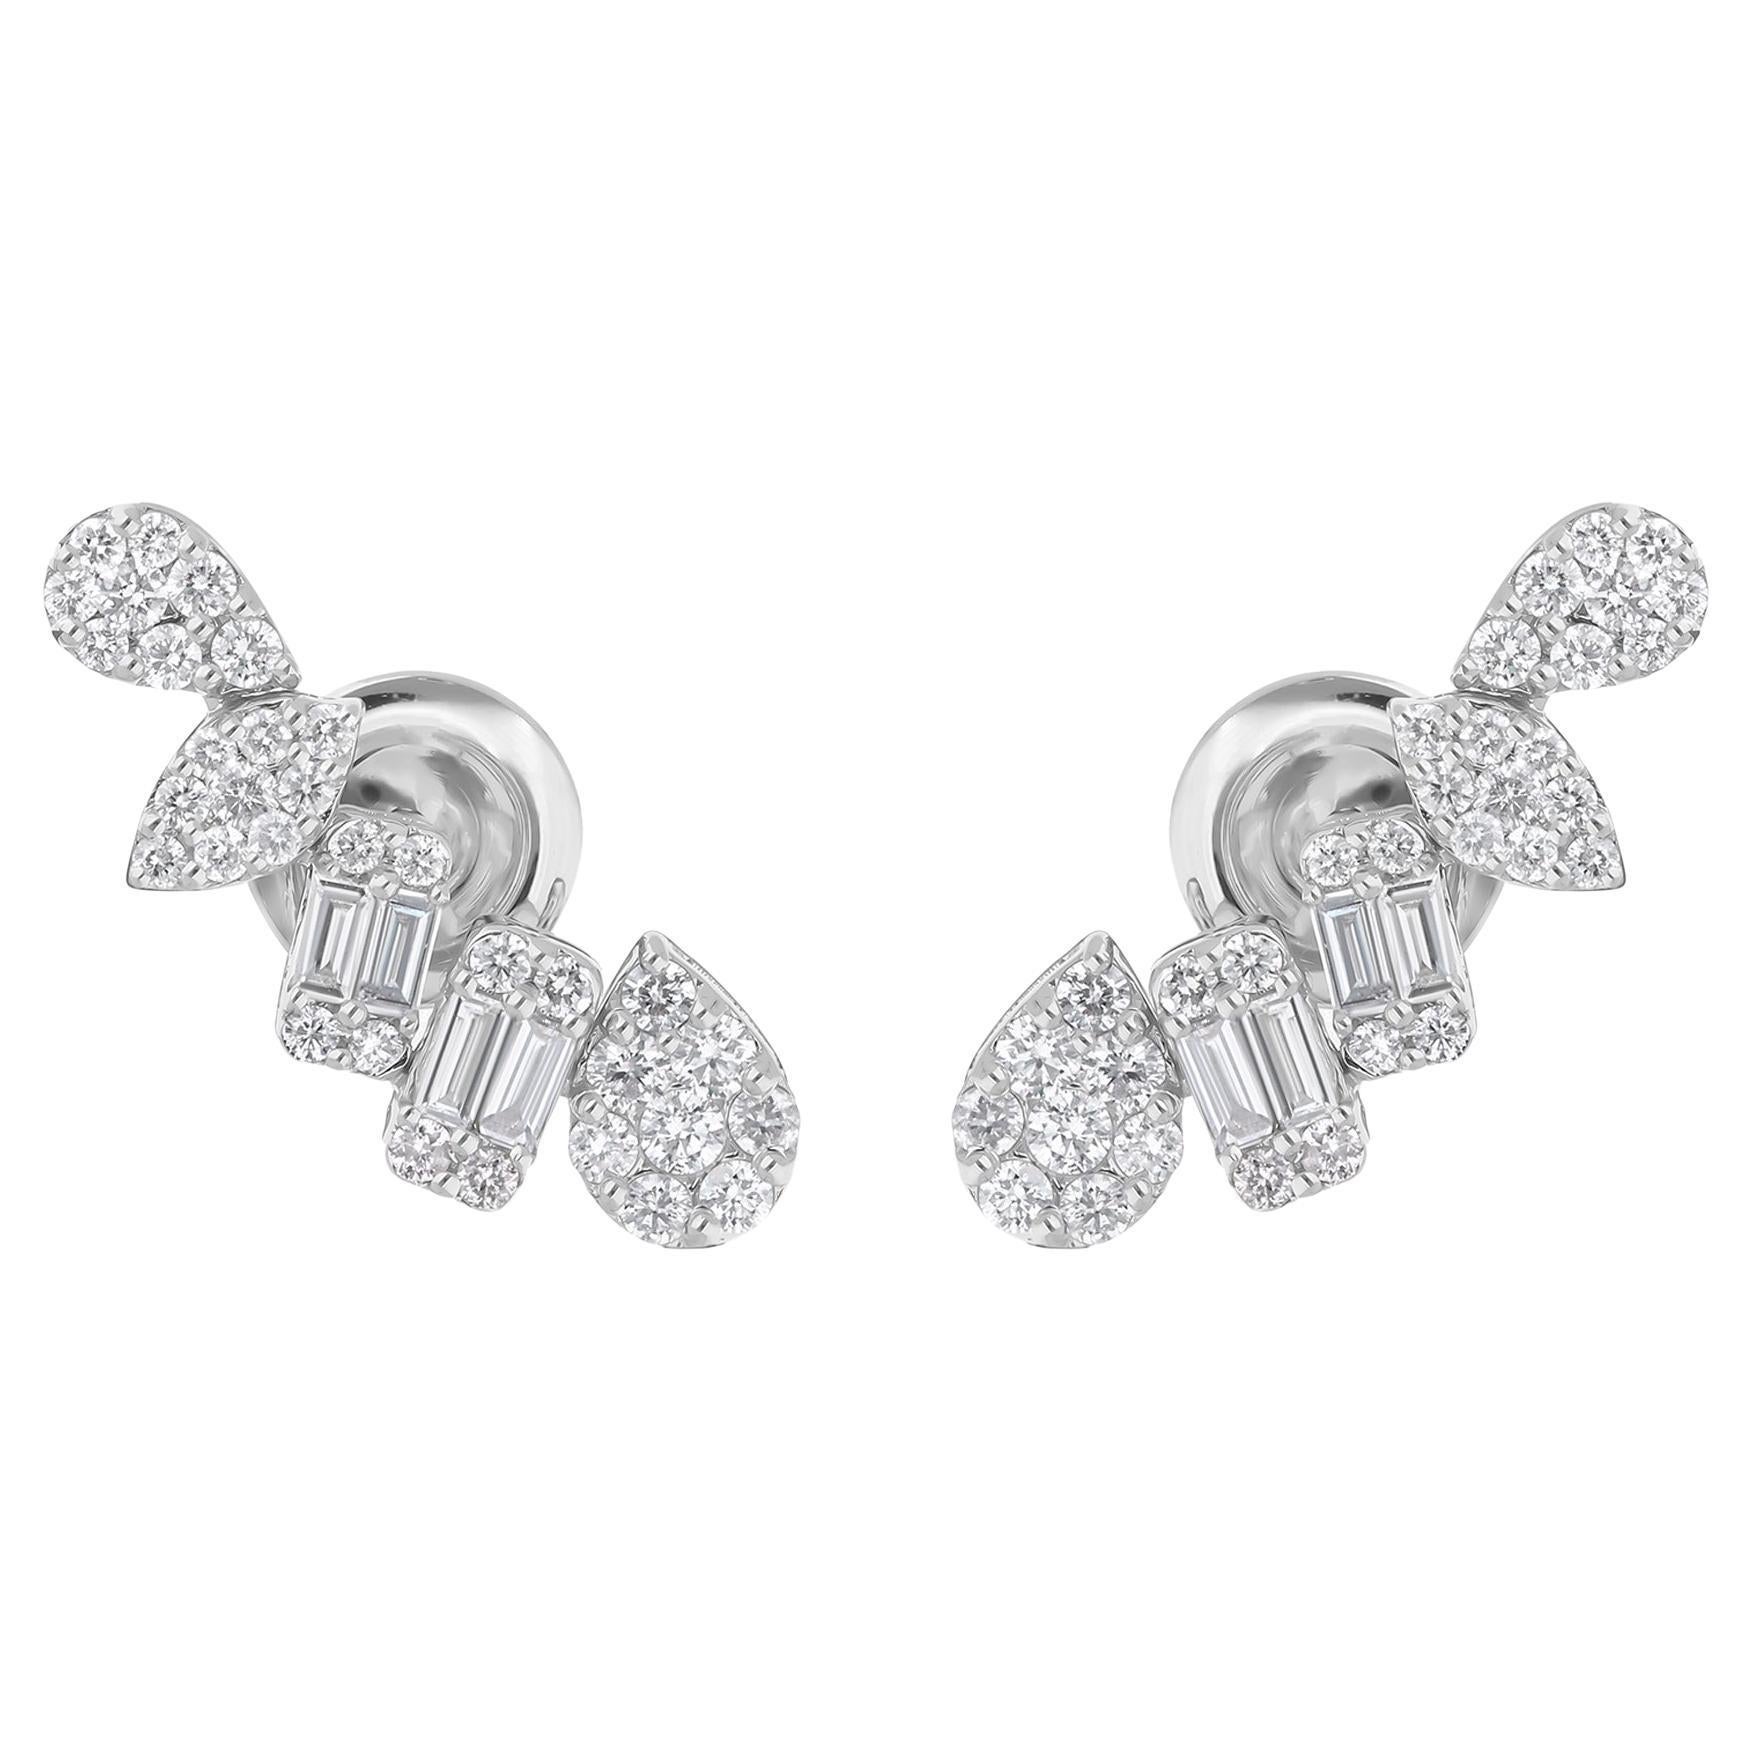 Natural 0.98 Carat Baguette & Round Diamond Earrings 14 Karat White Gold Jewelry For Sale